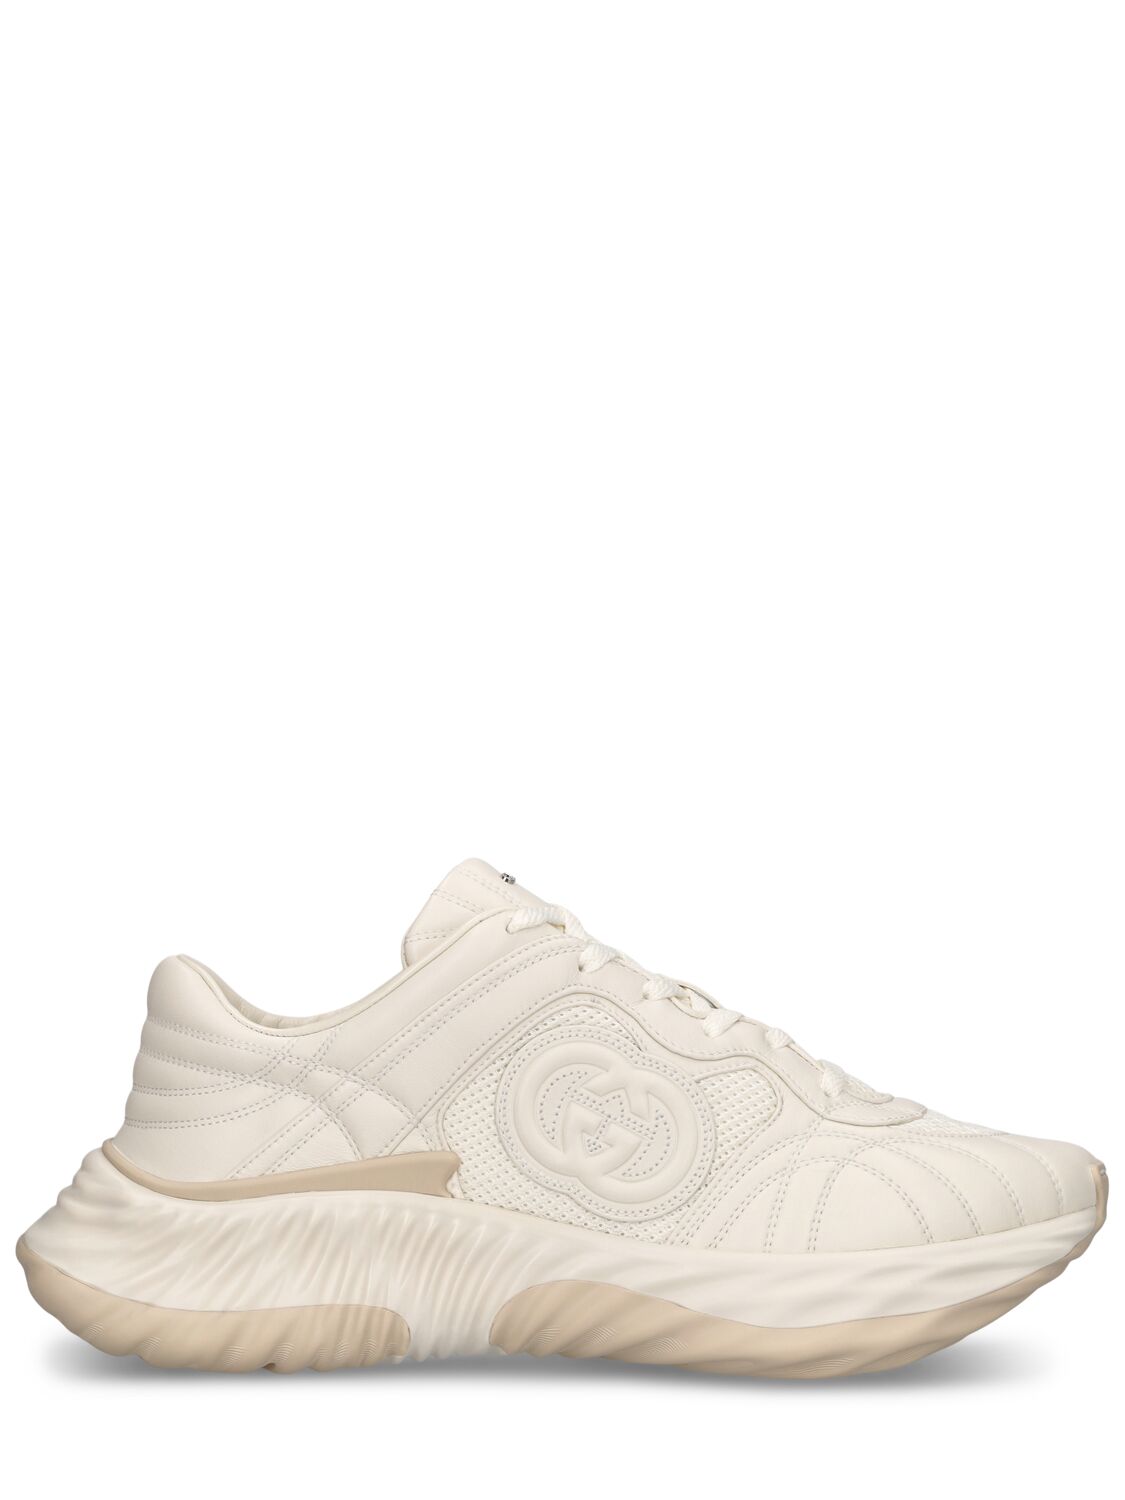 Image of Gg Ripple Tech & Leather Sneakers